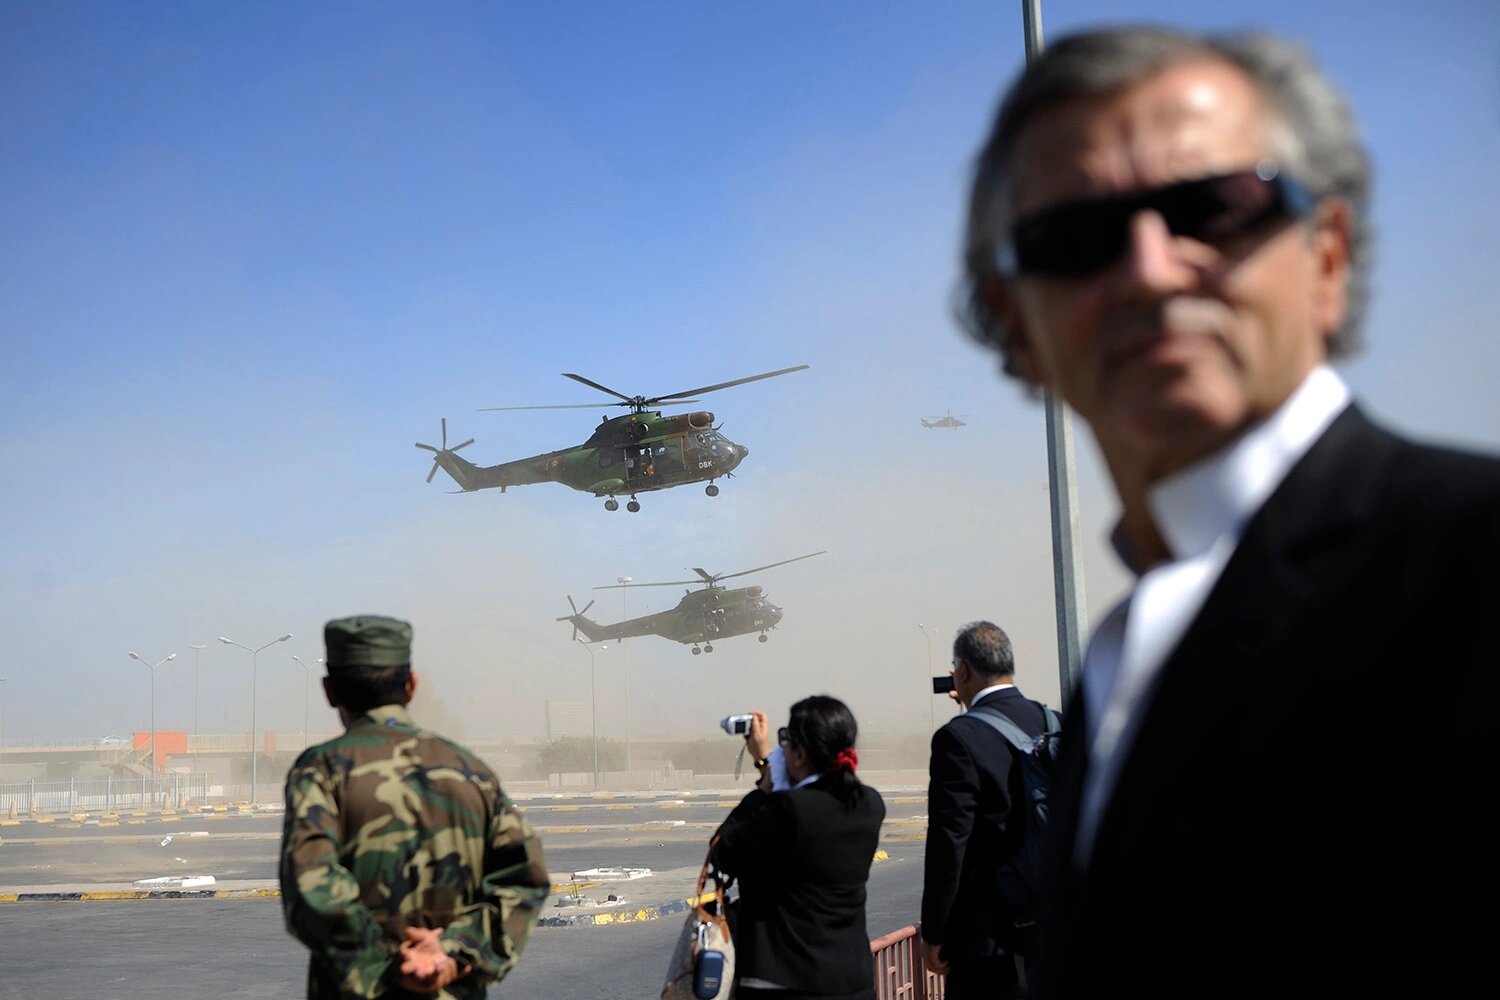 Lévy waits for the arrival of French President Nicolas Sarkozy, British Prime Minister David Cameron, and Libyan National Transitional Council leaders at the Tripoli Medical Center on Sept. 15, 2011.